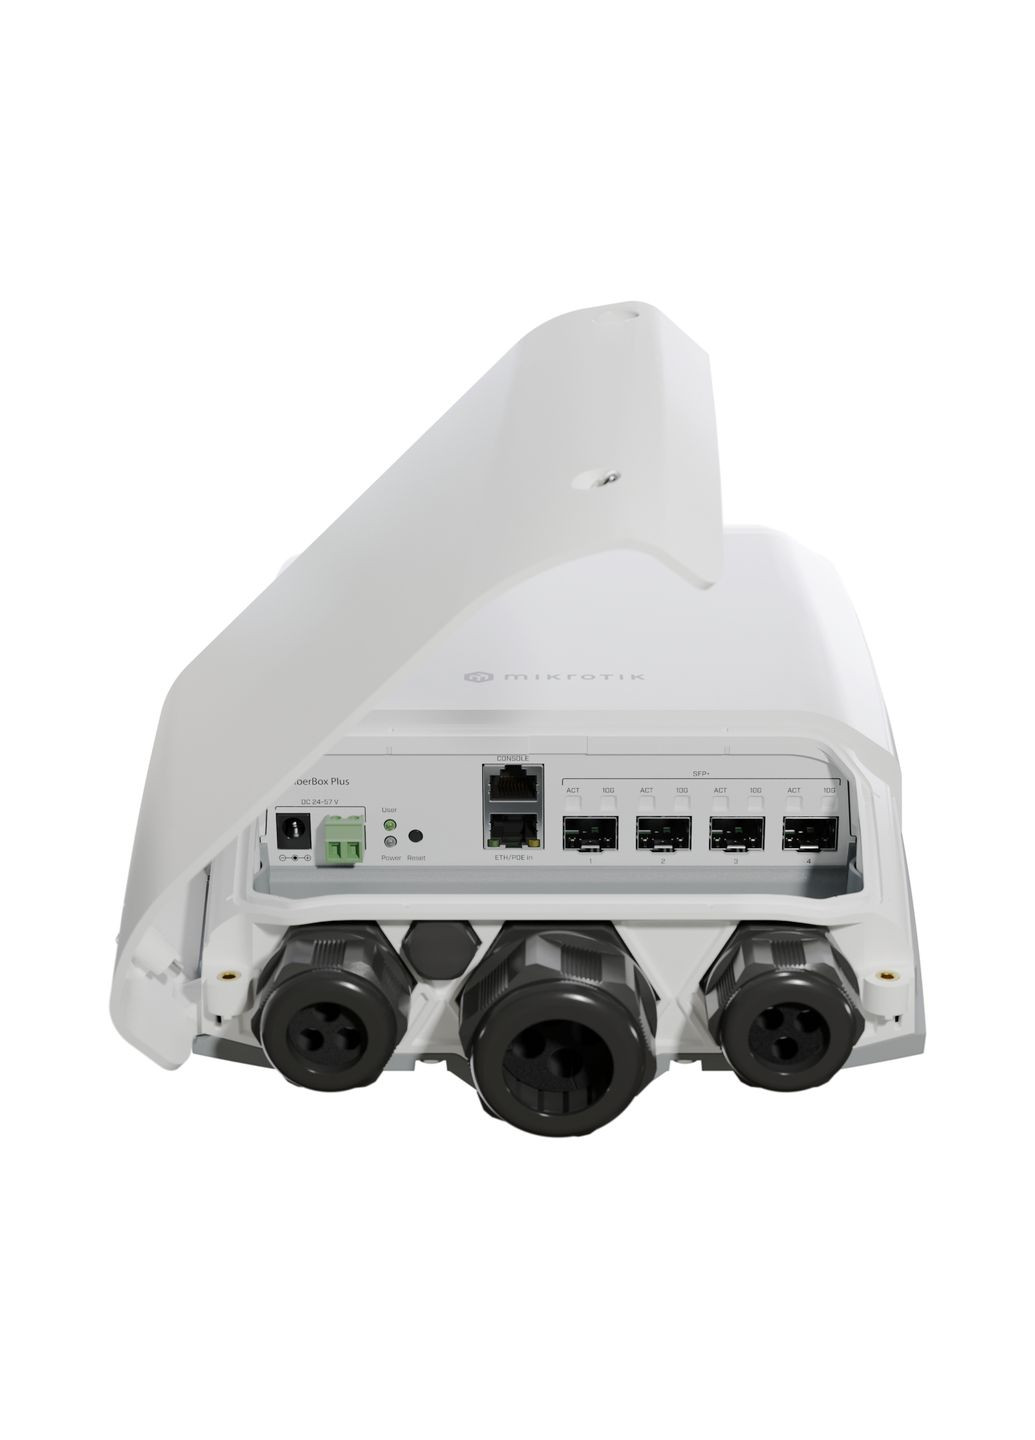 Комутатор мережевий CRS3051G-4S+OUT Mikrotik crs305-1g-4s+out (268146330)